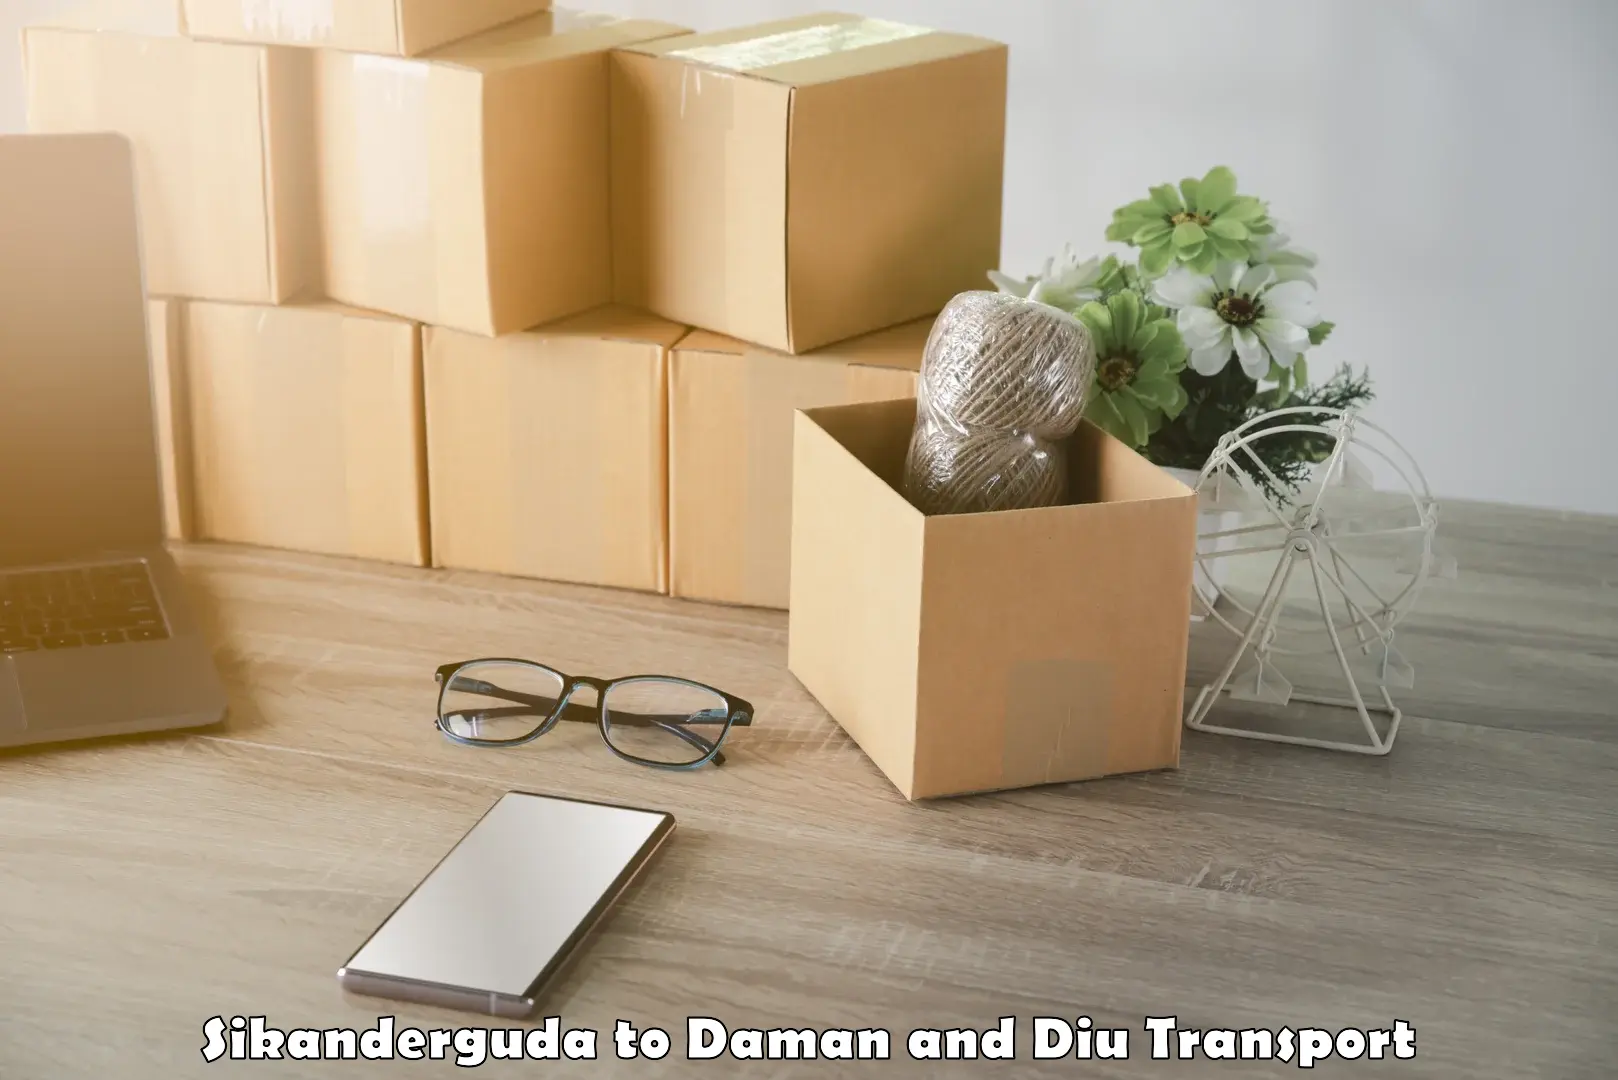 Nationwide transport services Sikanderguda to Daman and Diu